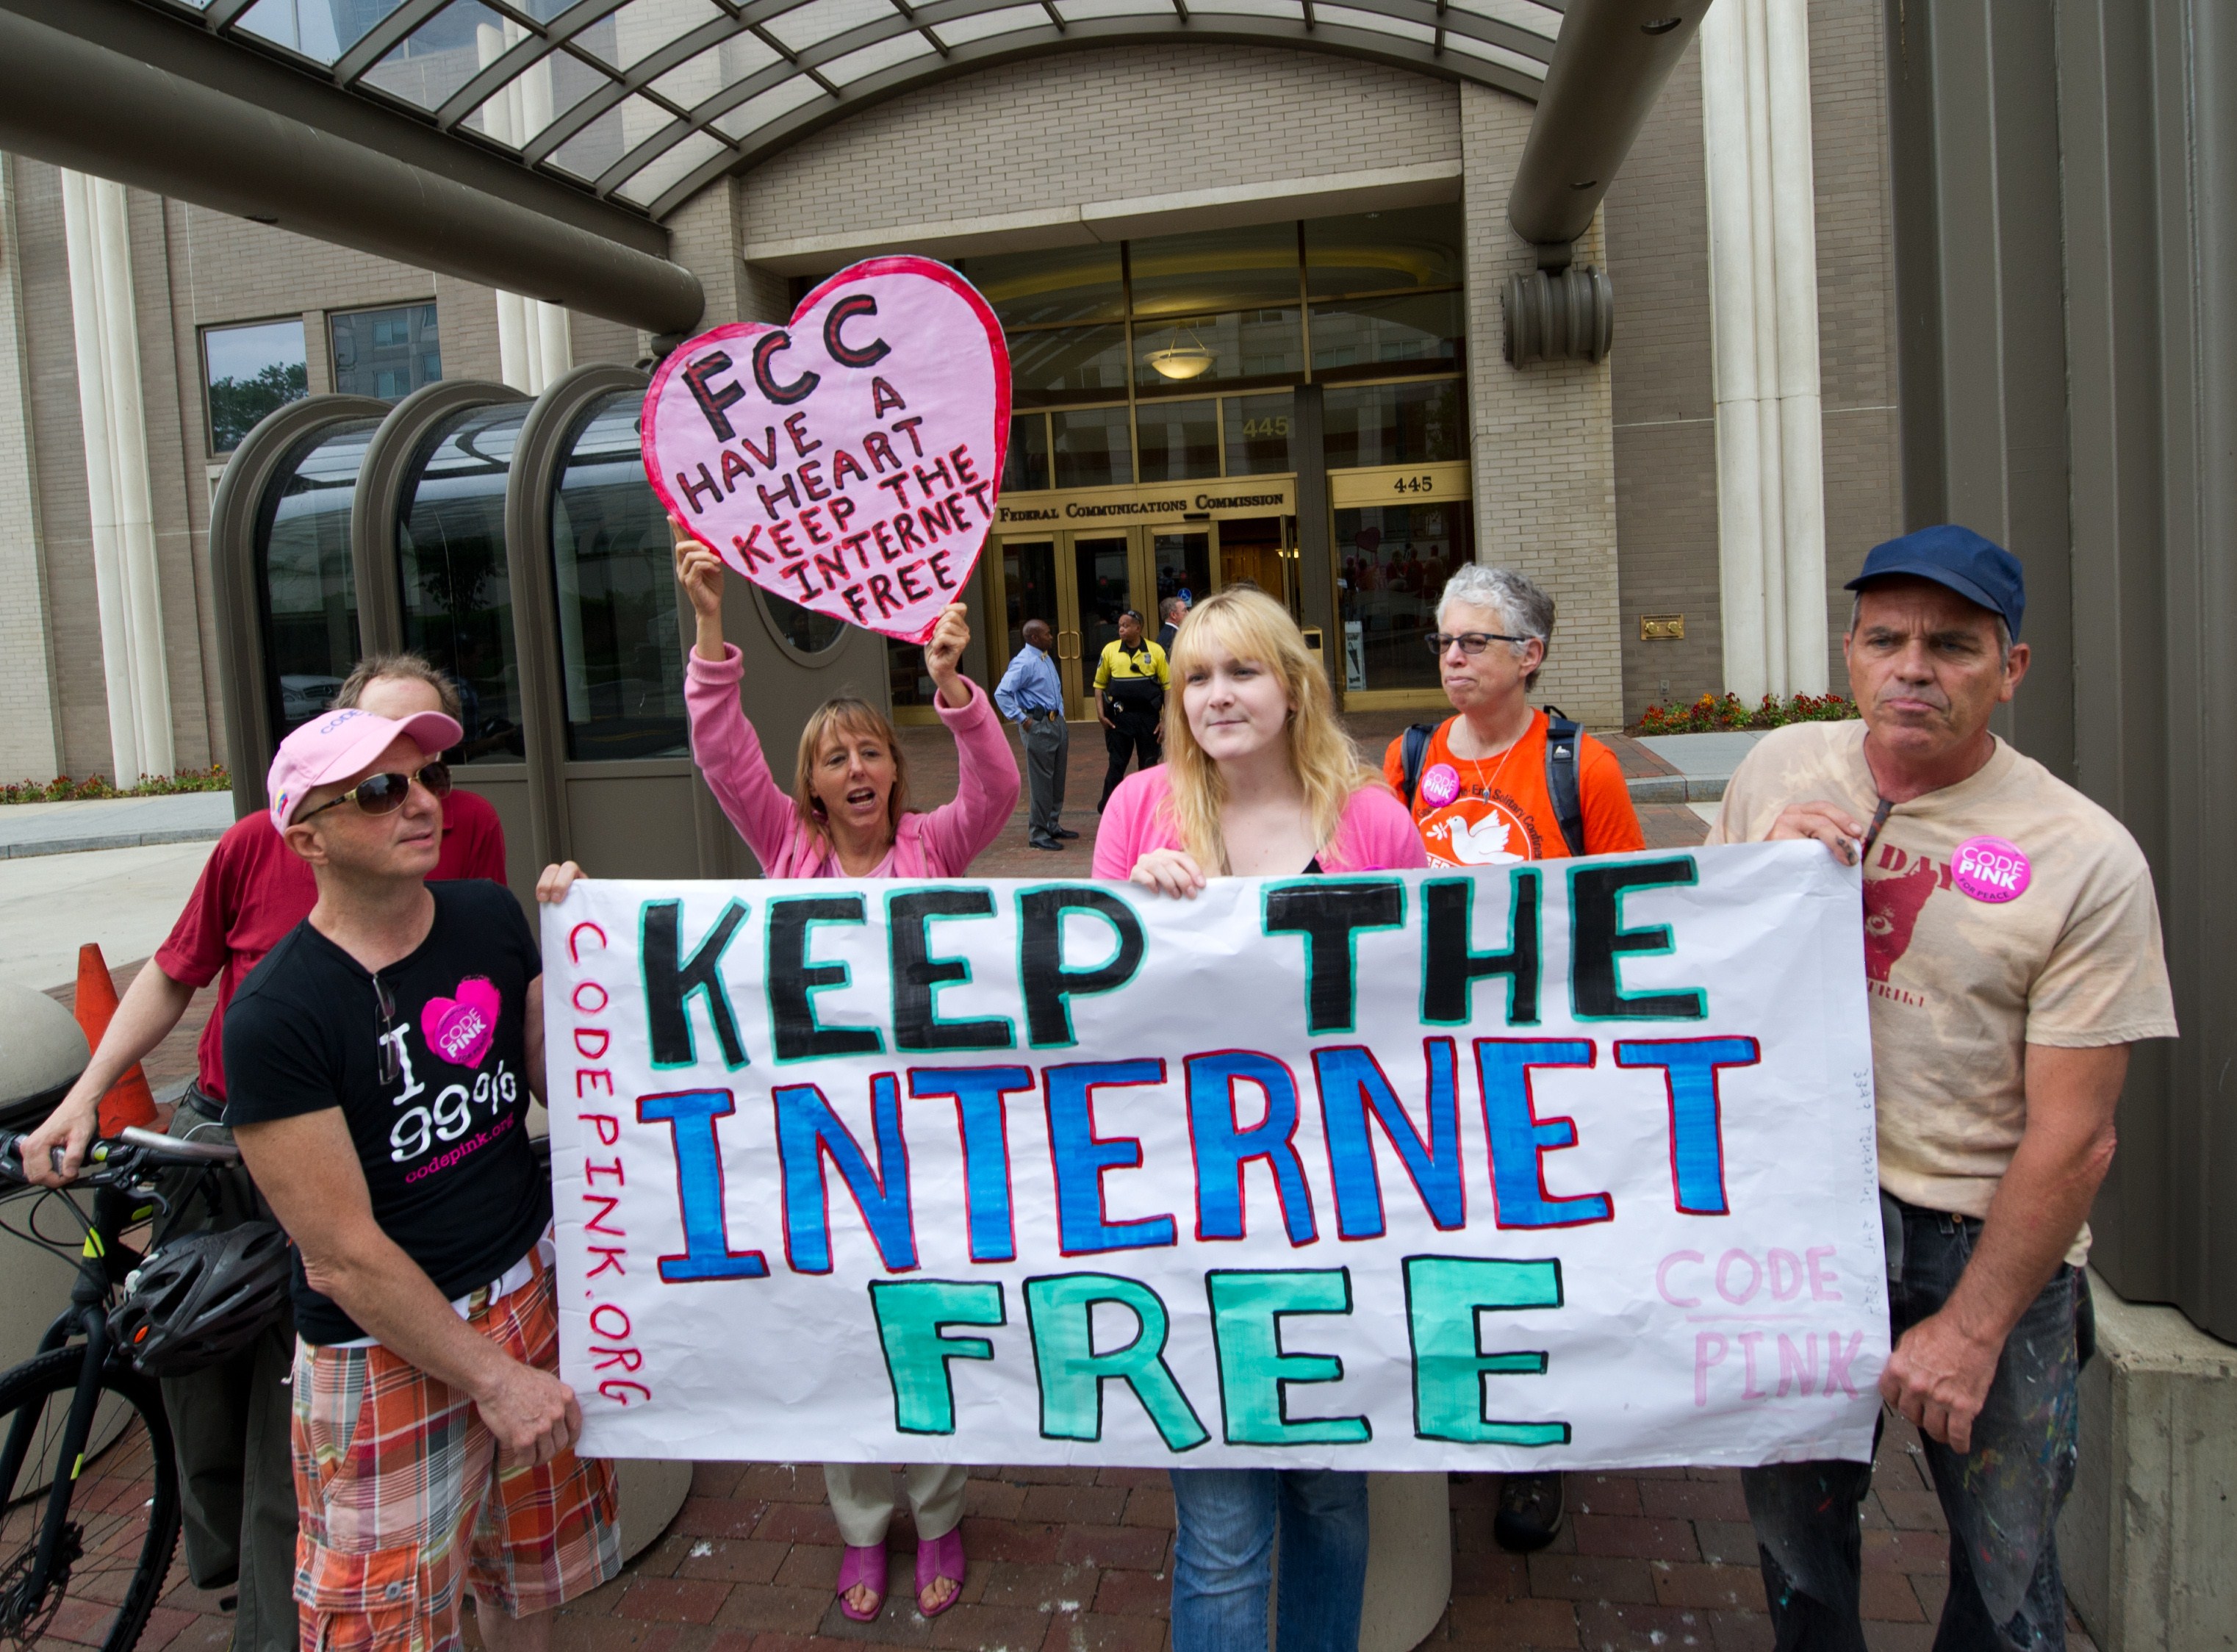 Protesters hold a rally to support "net neutrality" on May 15, 2014 at the FCC in Washington, DC. (Karen Bleier—AFP/Getty Images)